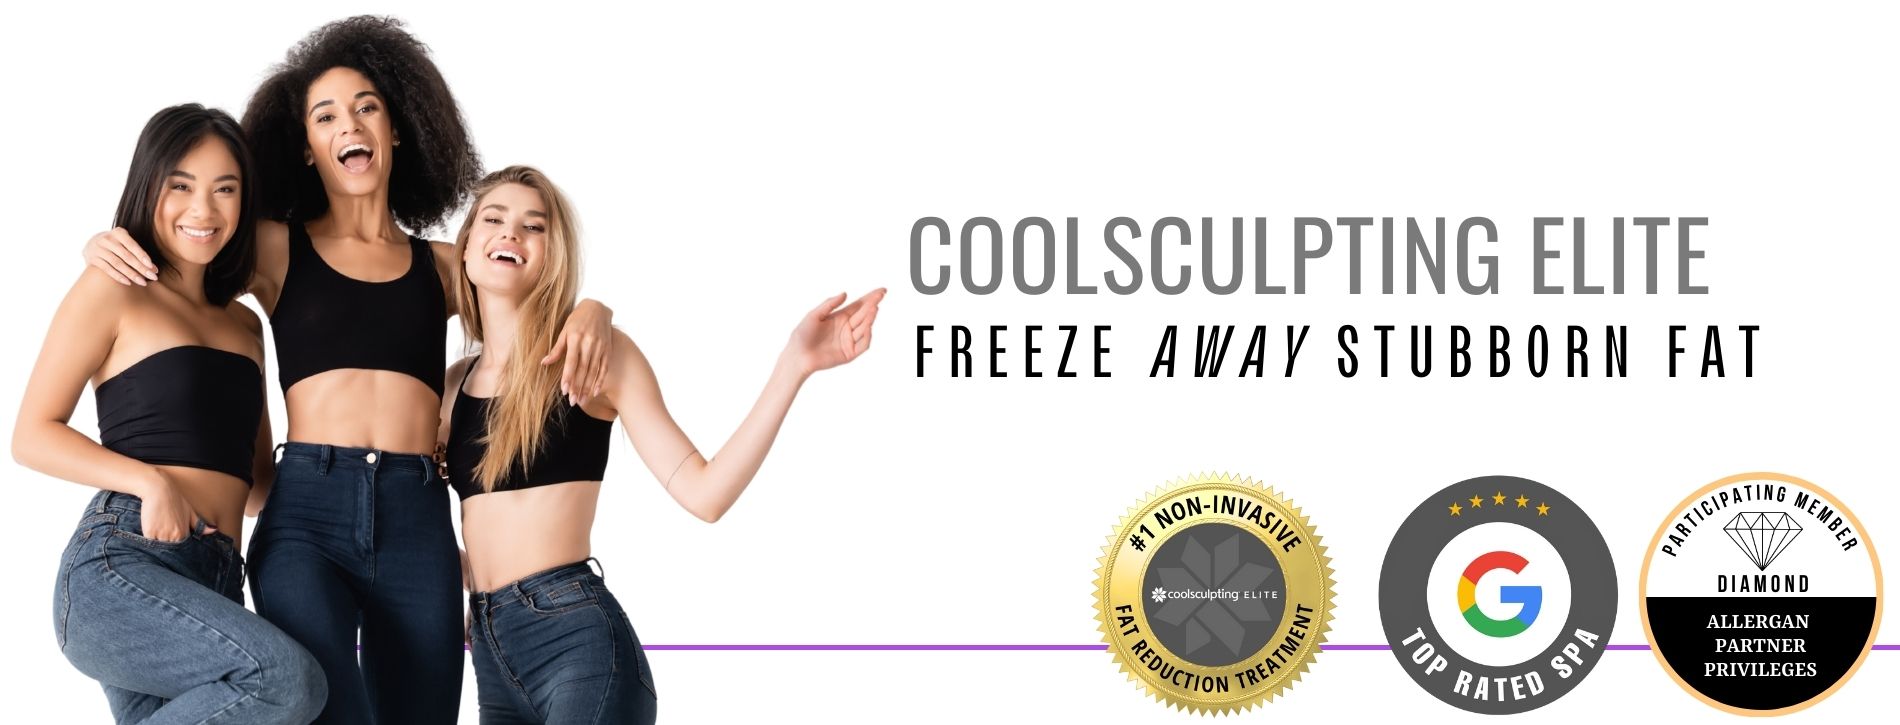 group of young women with sculpted bodies promoting CoolSculpting Elite treatment in Fort Worth, TX